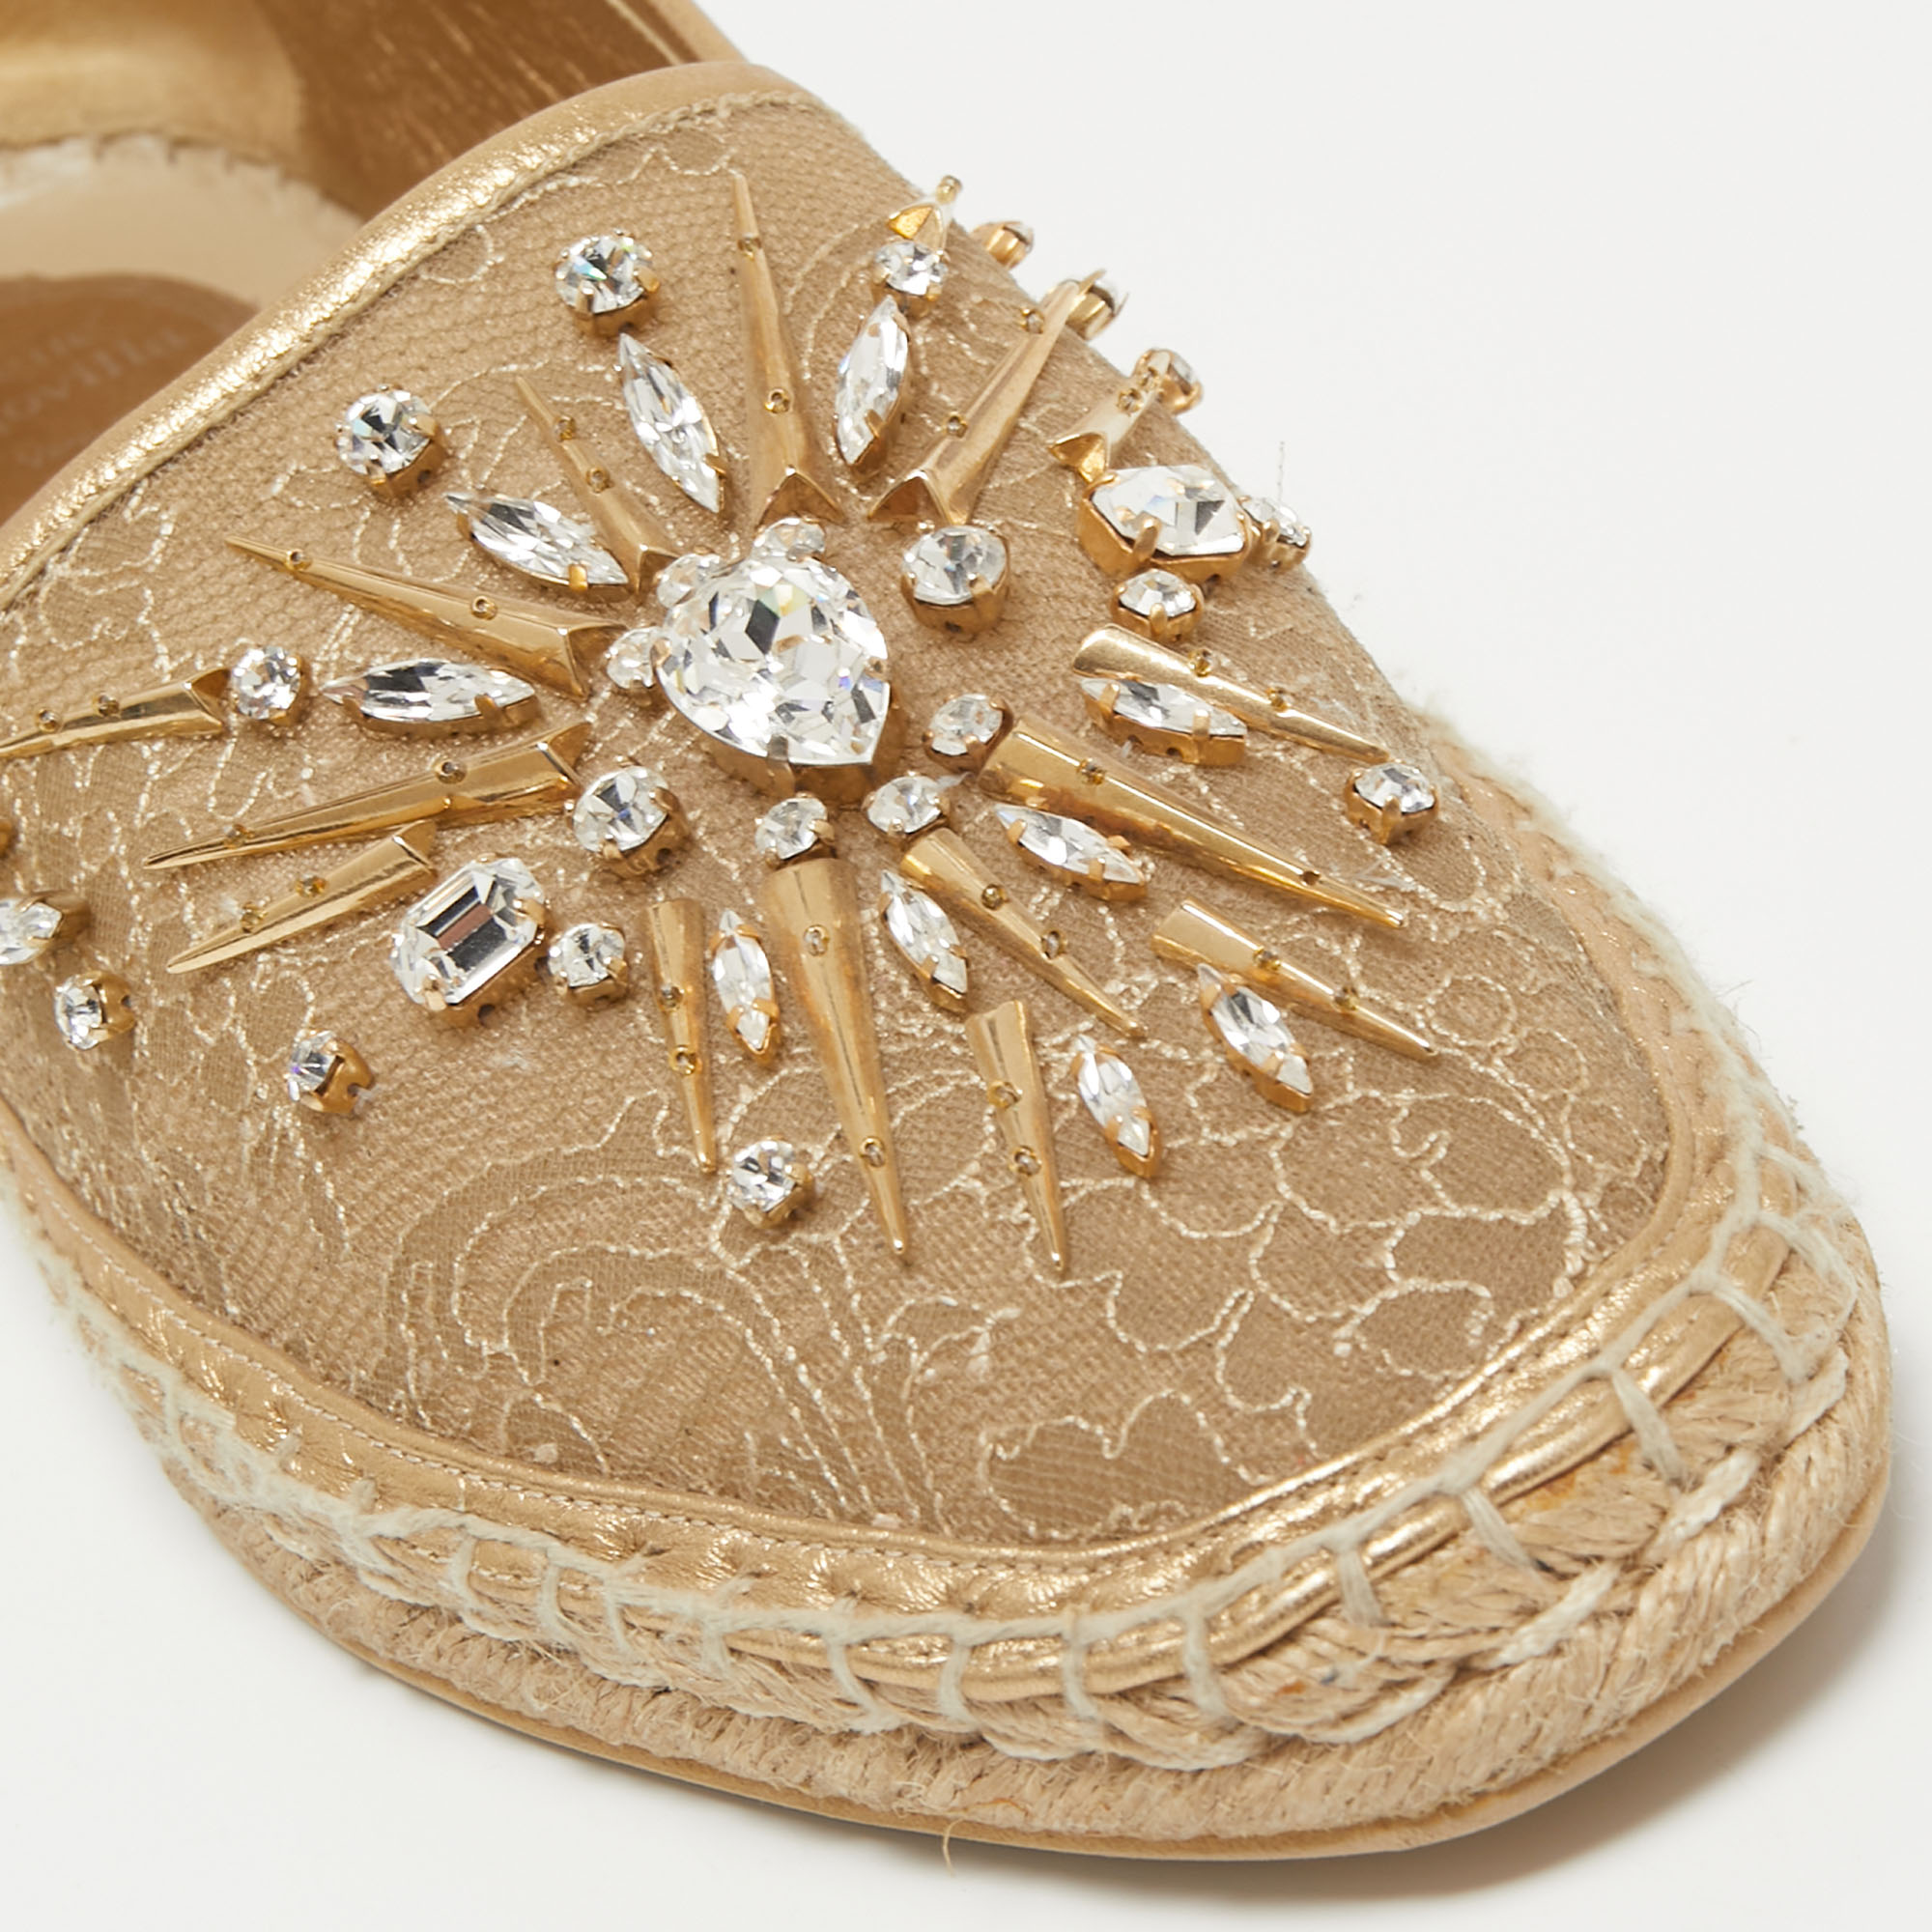 René Caovilla Metallic Gold Lace And Leather Crystal Embellished Espadrille Flats Size 40